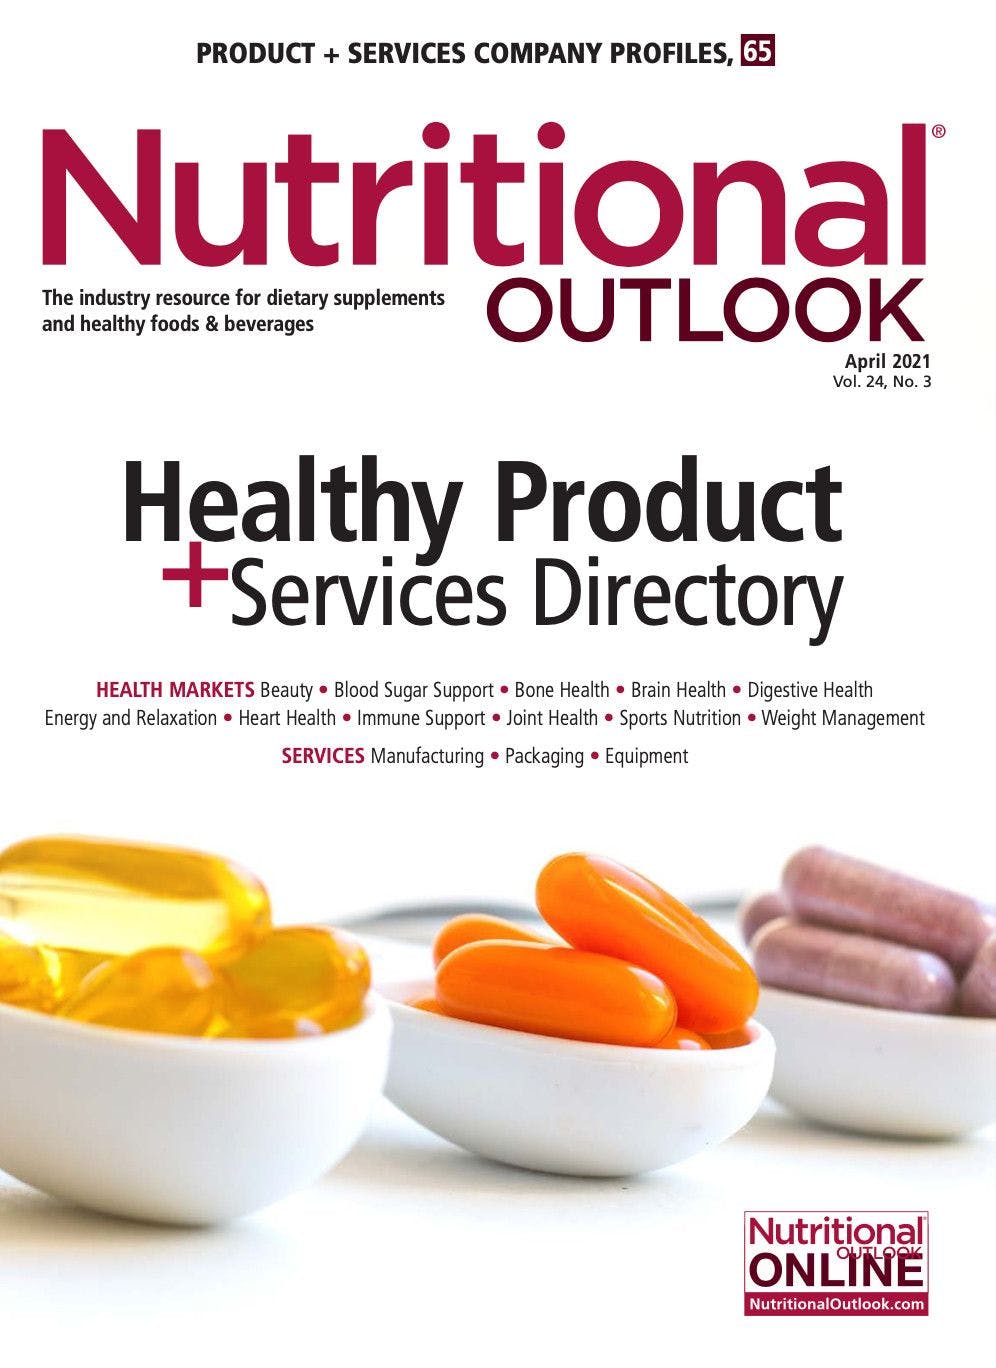 Nutritional Outlook Vol. 24 No. 3